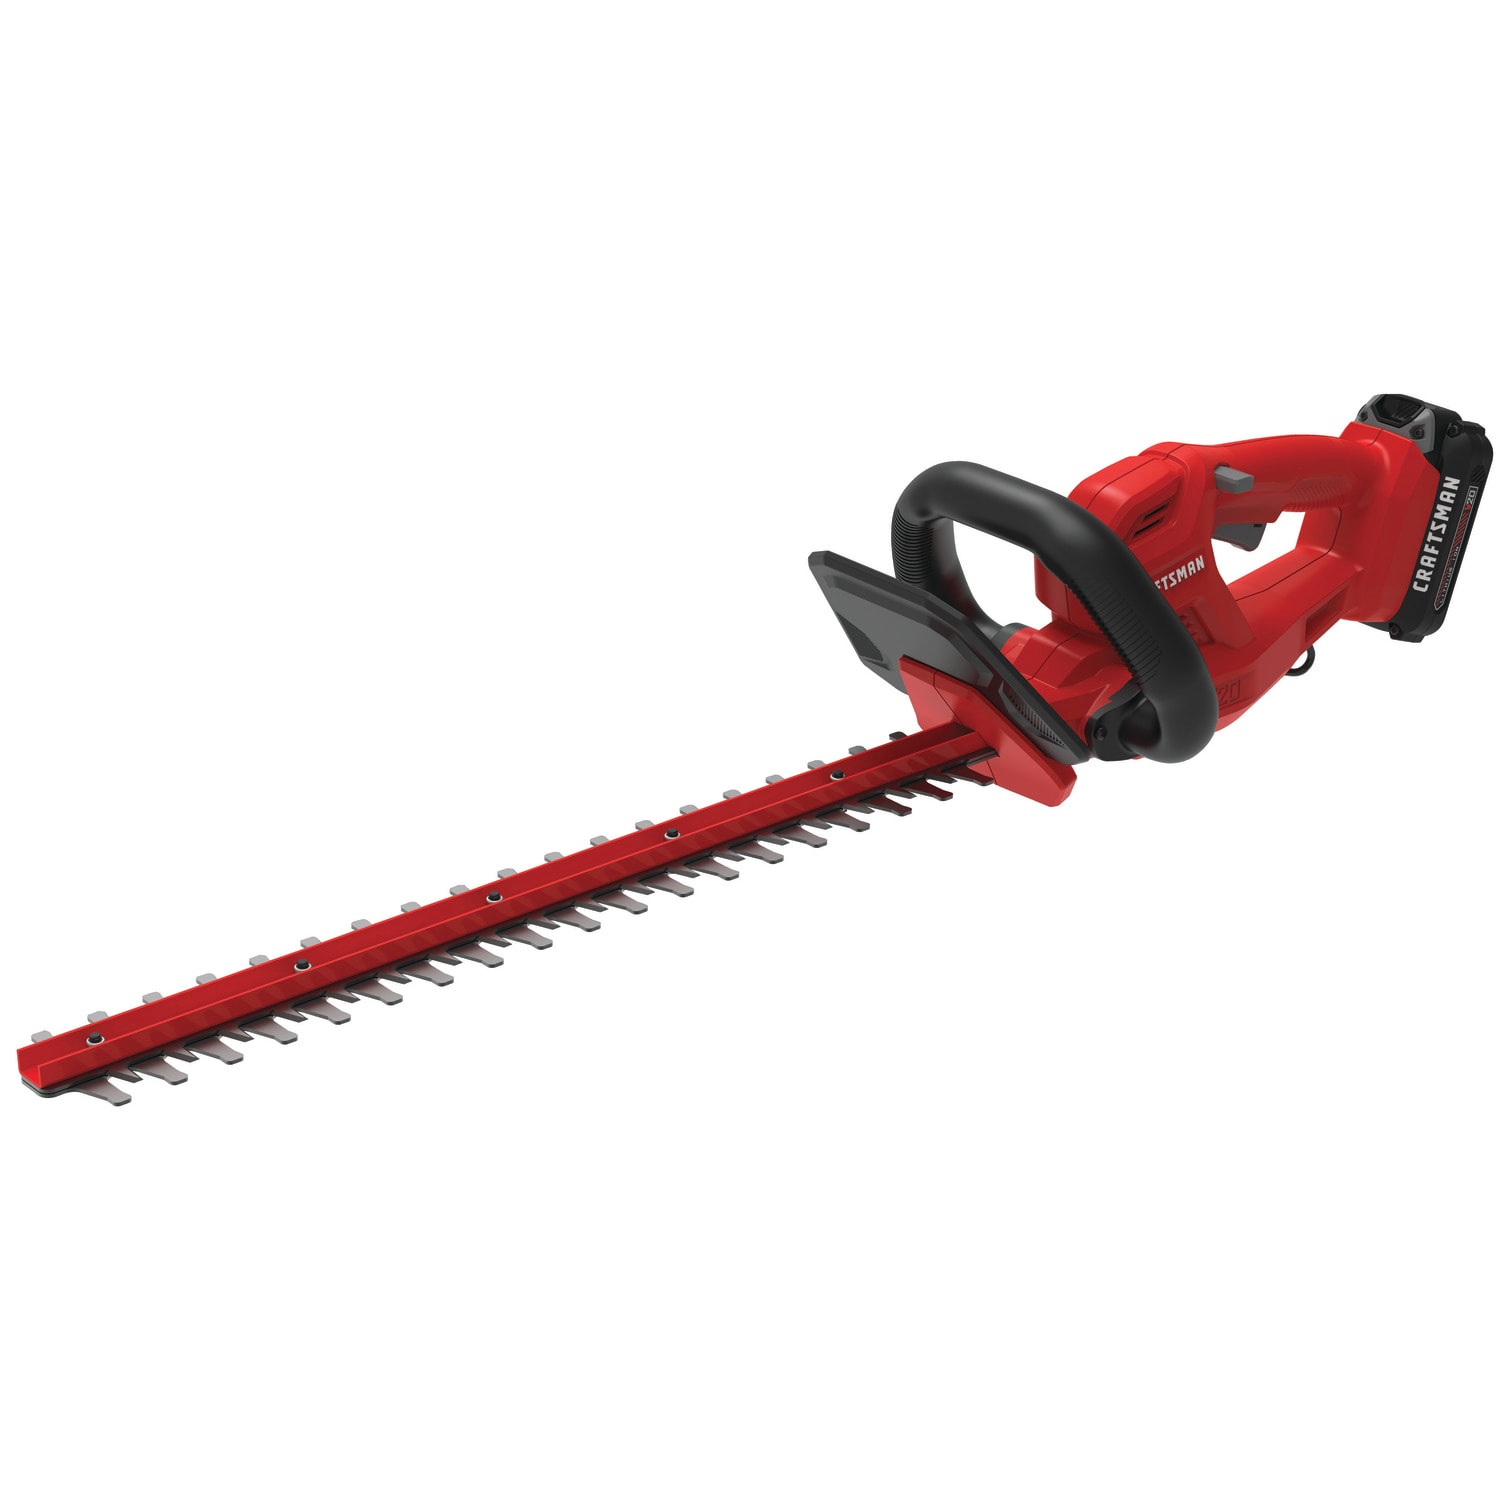 Hedge Trimmers for sale in Wild Island, Florida